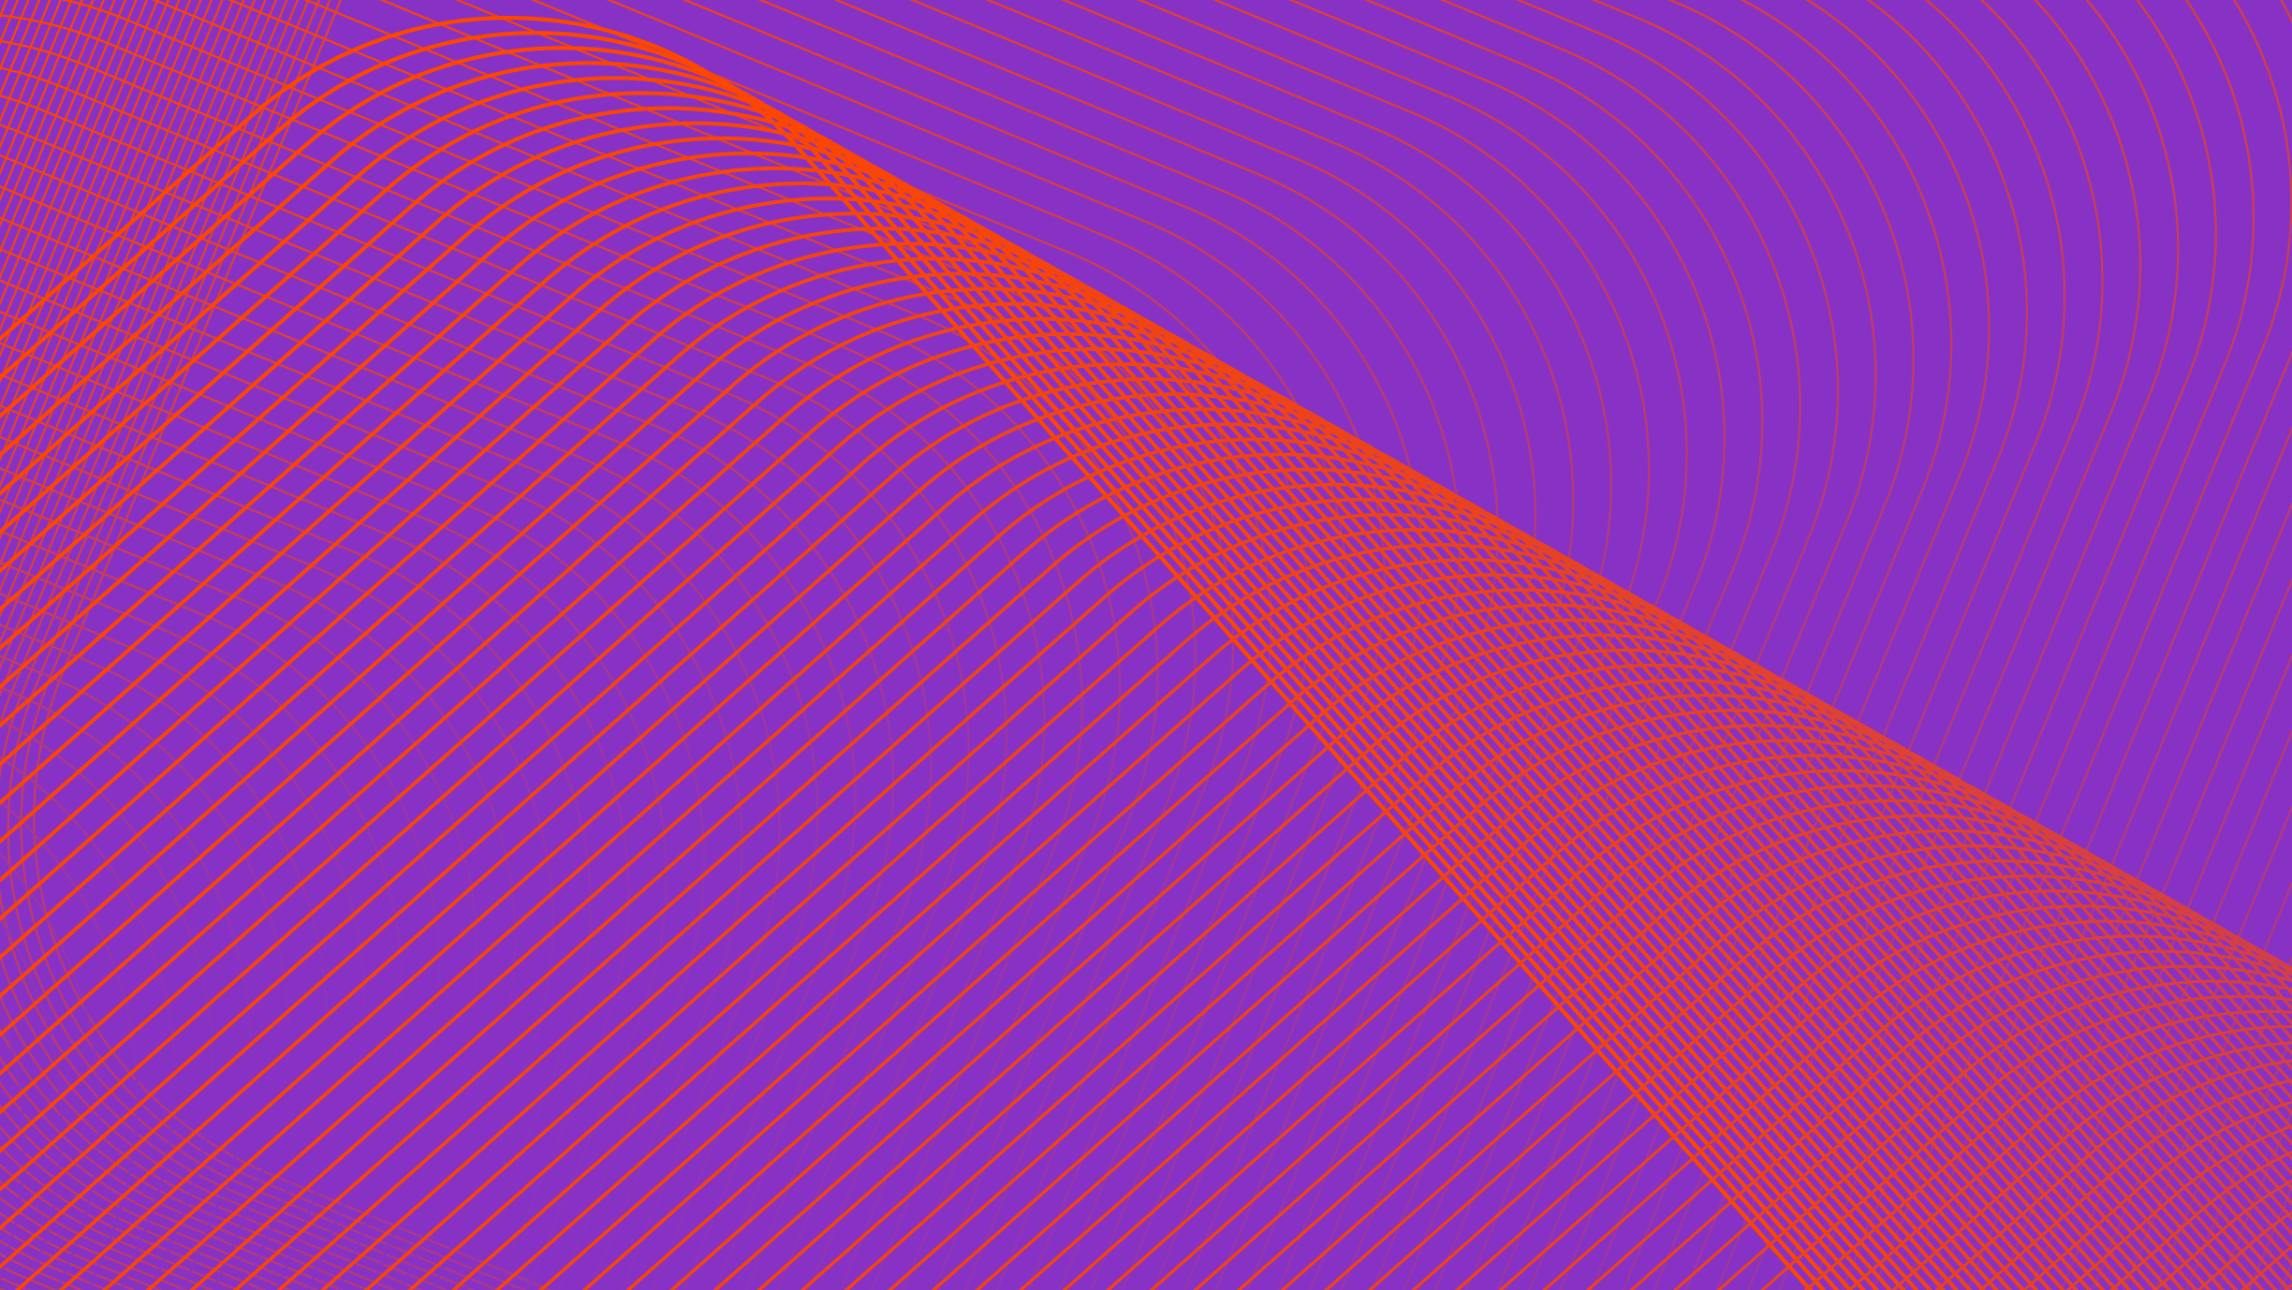 A digital rendering of red parallel lines that bend and curve over a purple background.